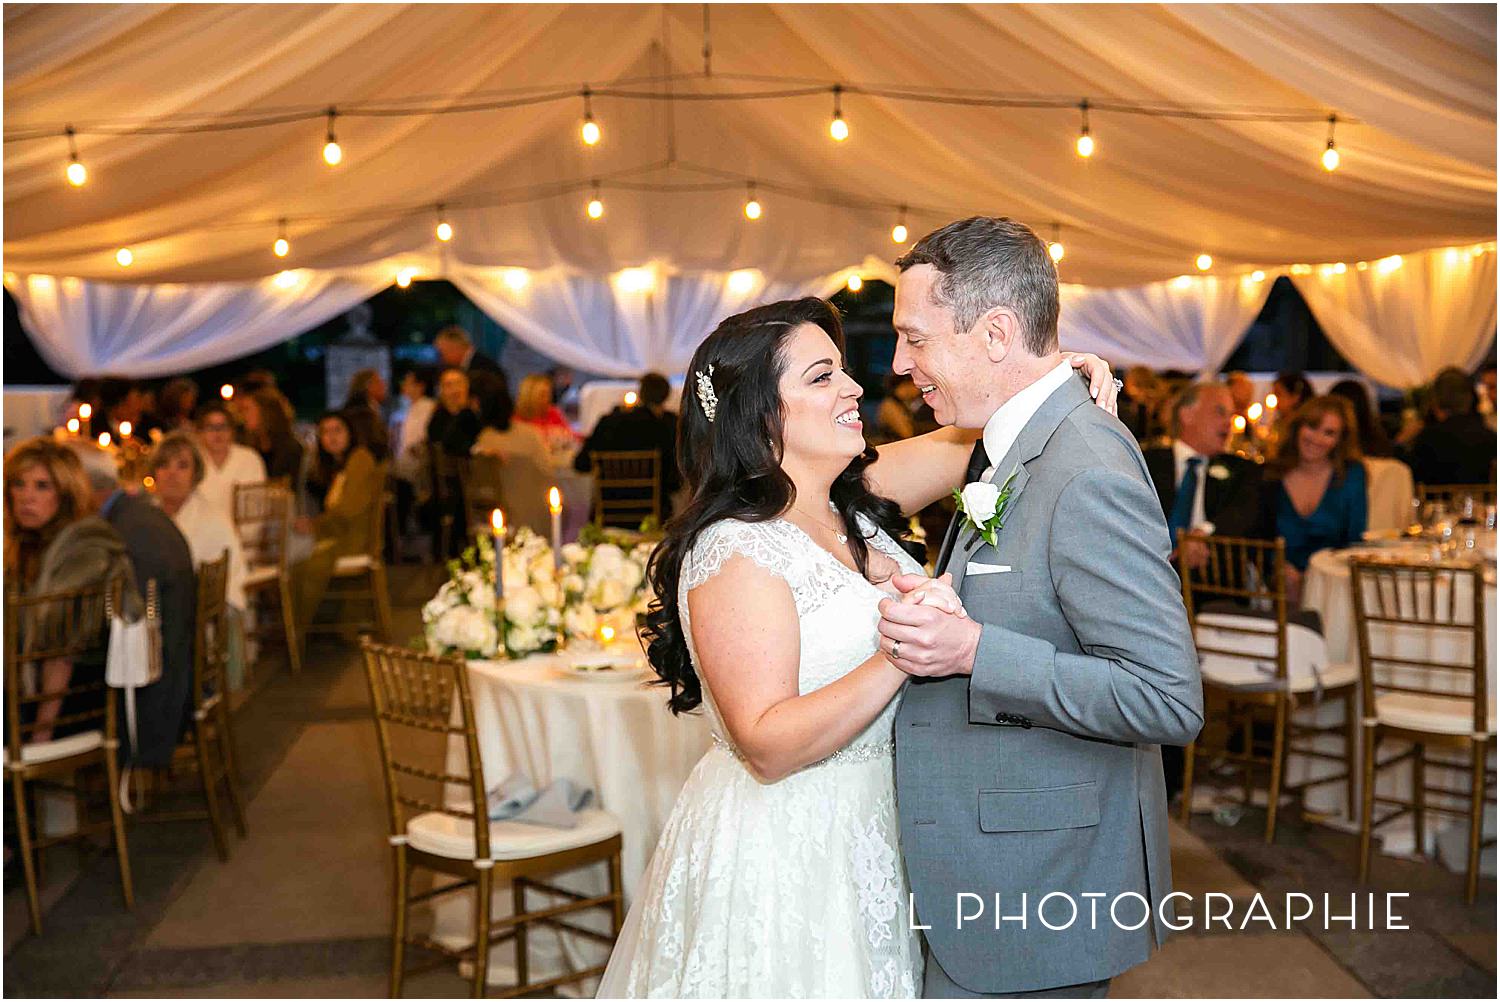 L Photographie St. Louis wedding photography Westwood Country Club Cosmopolitan Events_0044.jpg